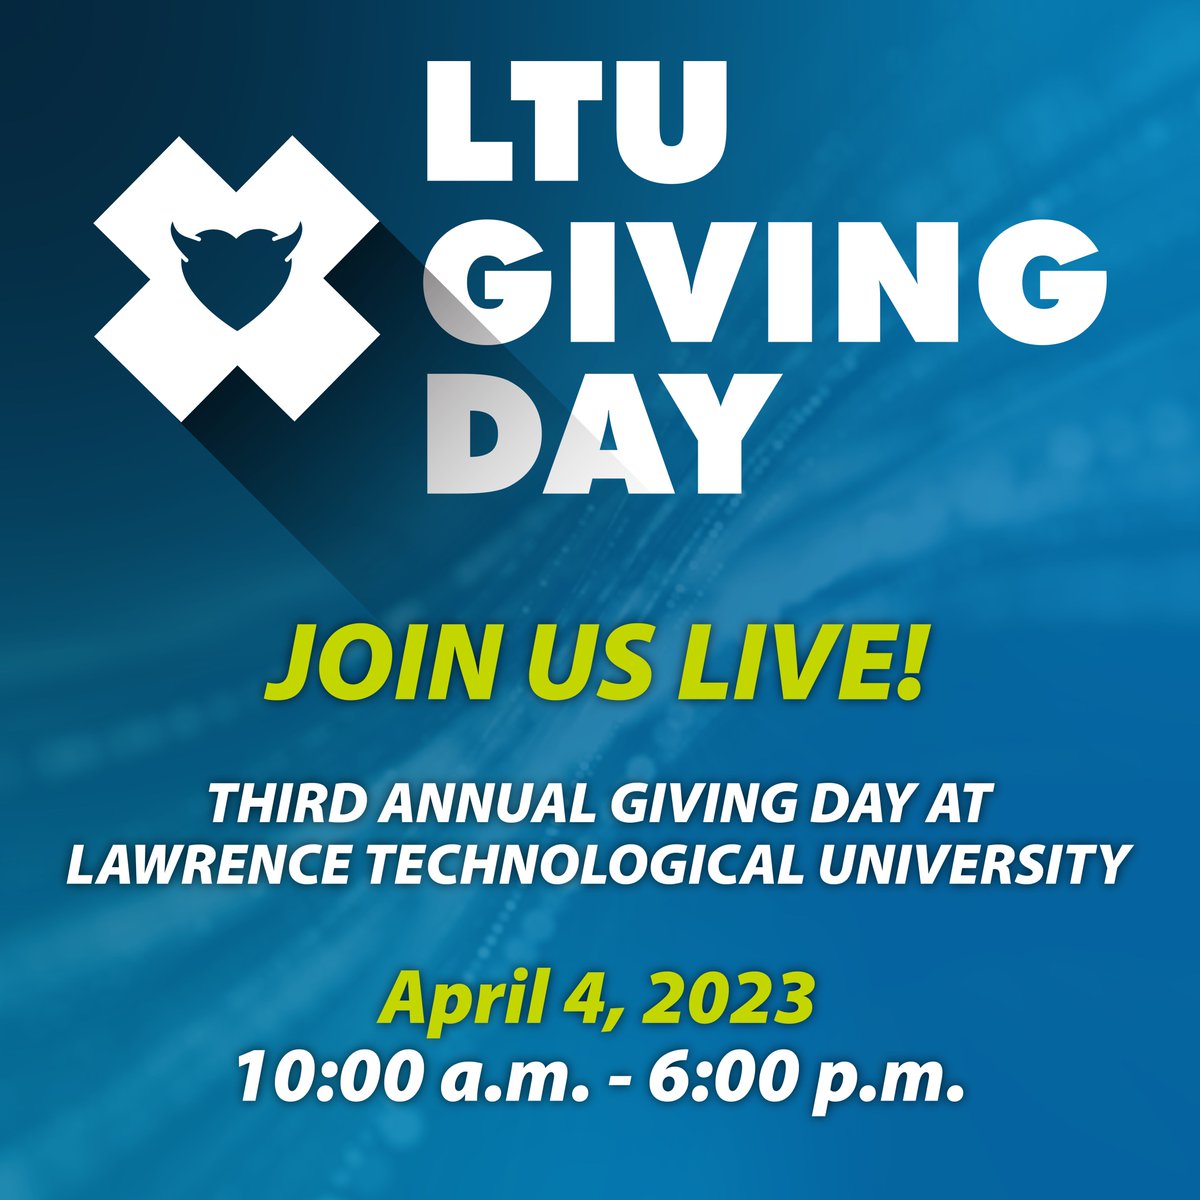 Join us at 10 a.m. today for live coverage of Lawrence Technological University's third annual Giving Day! 💙🤍

YouTube 🔗: bit.ly/4310H0M   
Facebook 🔗: bit.ly/3nFAN2y 

Let's make the day a big deal for our students! 

#WeAreLTU #LTUGive